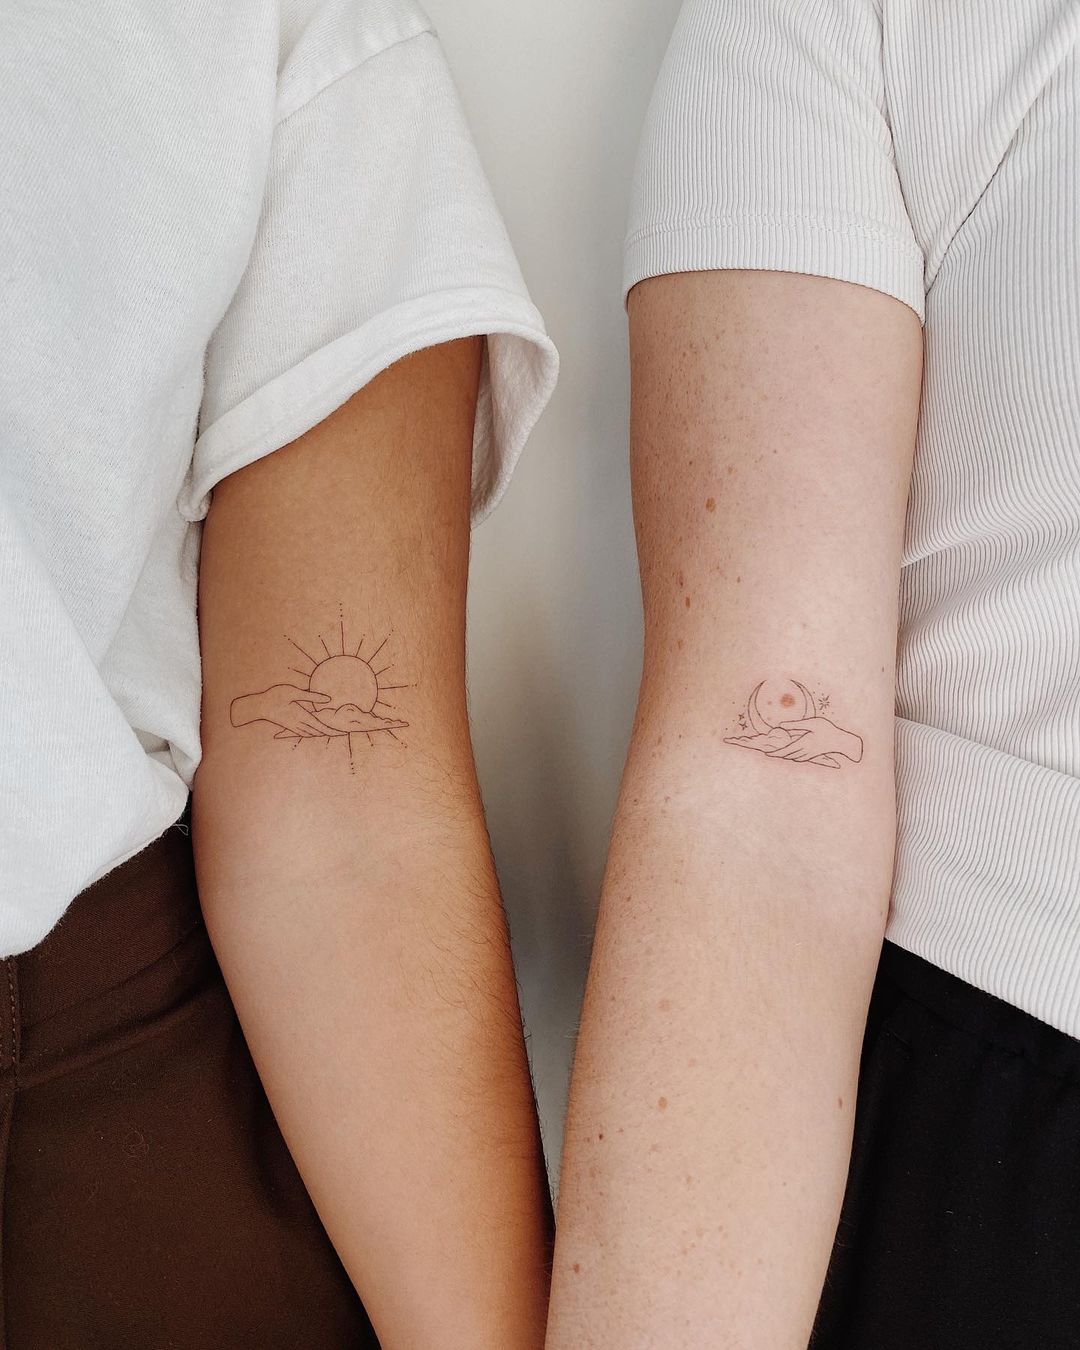 11 Girly Best Friend Tattoos Ideas That Will Blow Your Mind  alexie